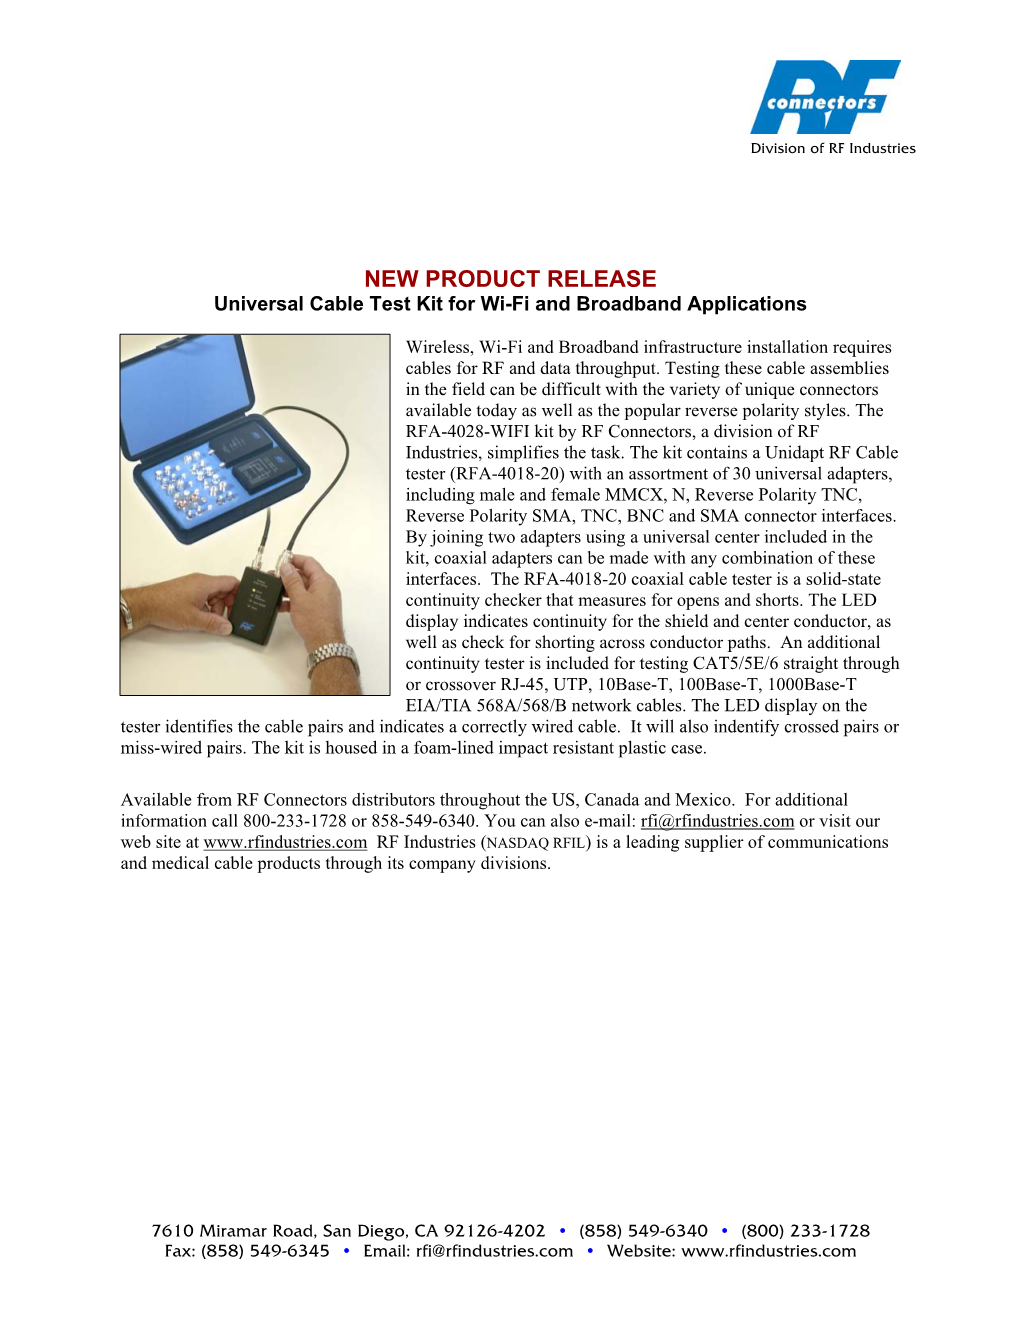 NEW PRODUCT RELEASE Universal Cable Test Kit for Wi-Fi and Broadband Applications